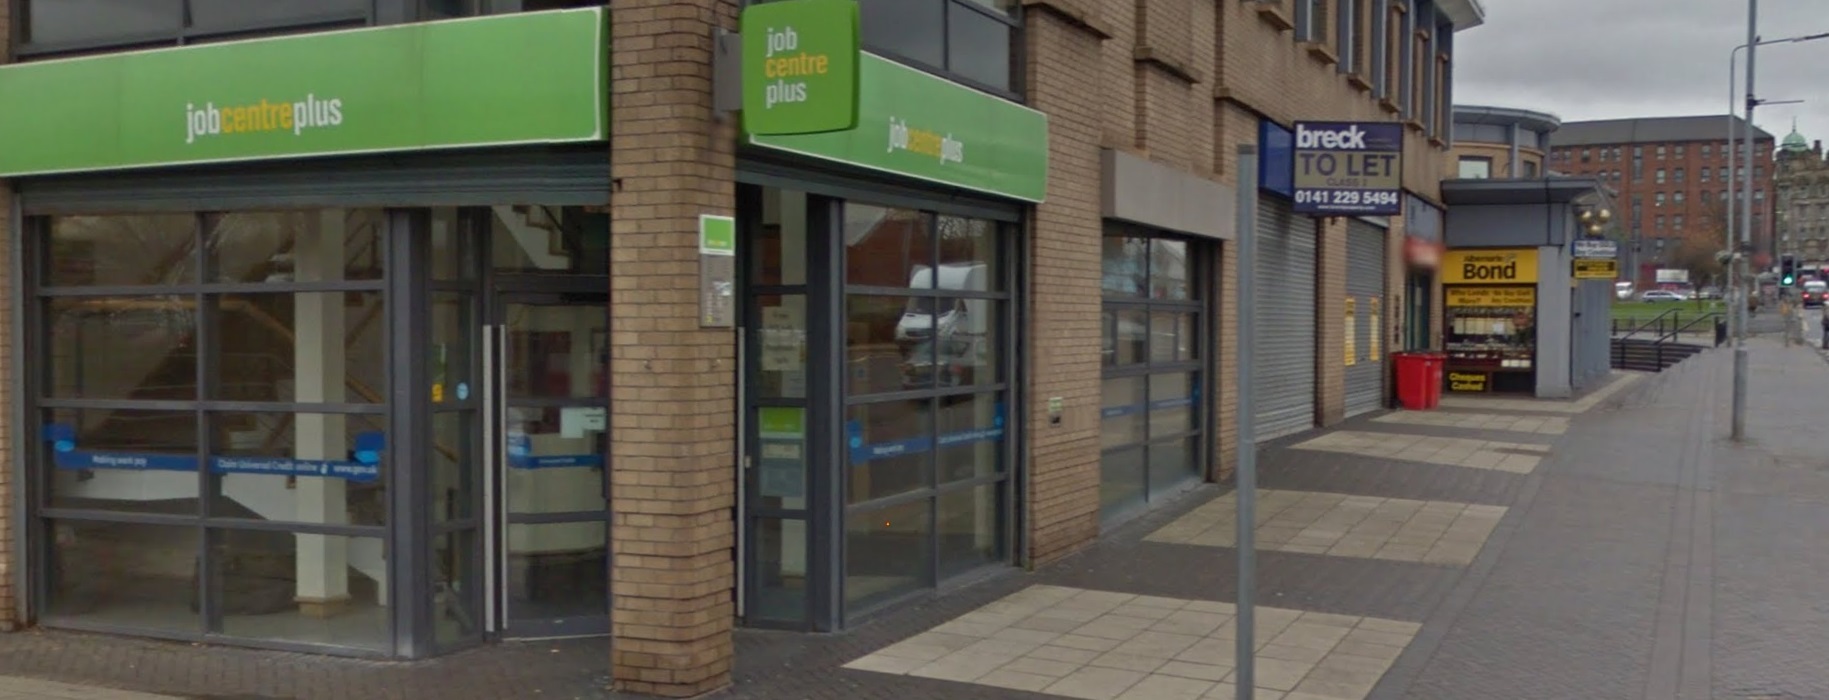 Government under fire over 'covert' bid to axe half of Glasgow's job centres